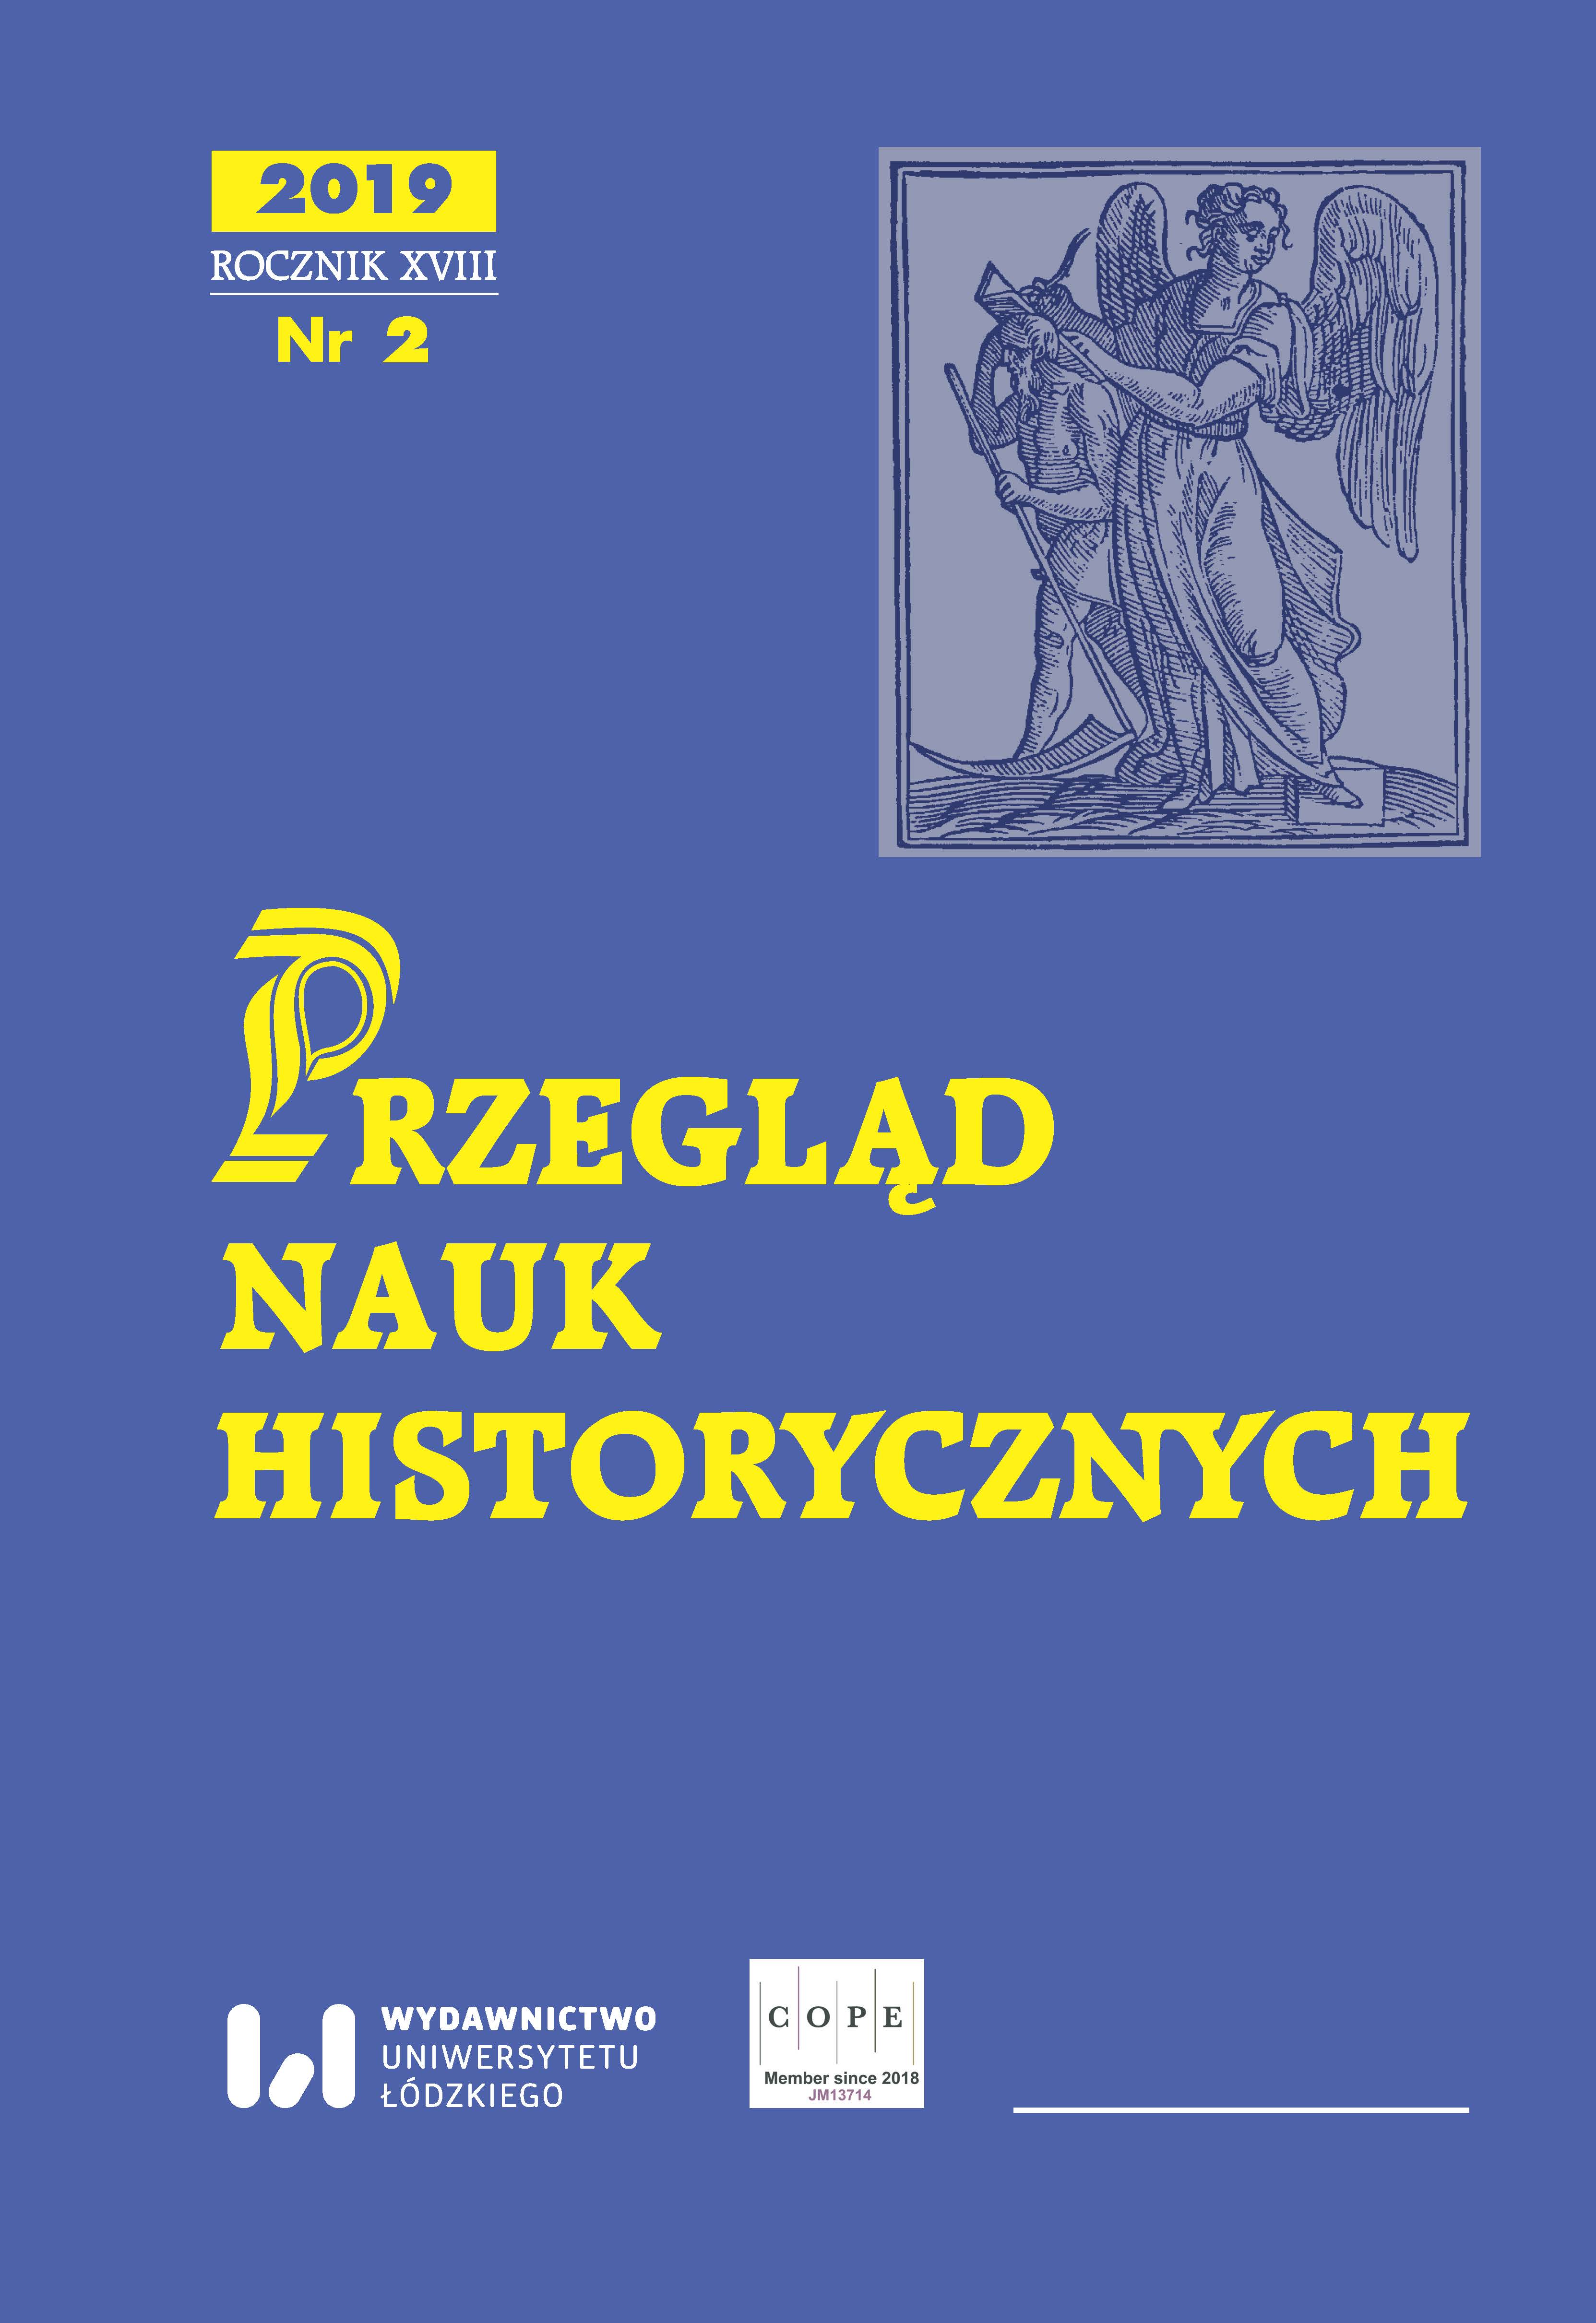 History and portrayal of Charłupia Wielka property in hands of the Walewskis, Kolumna court of arms, in the second half of 17th and in 18th century according to the inventory Cover Image